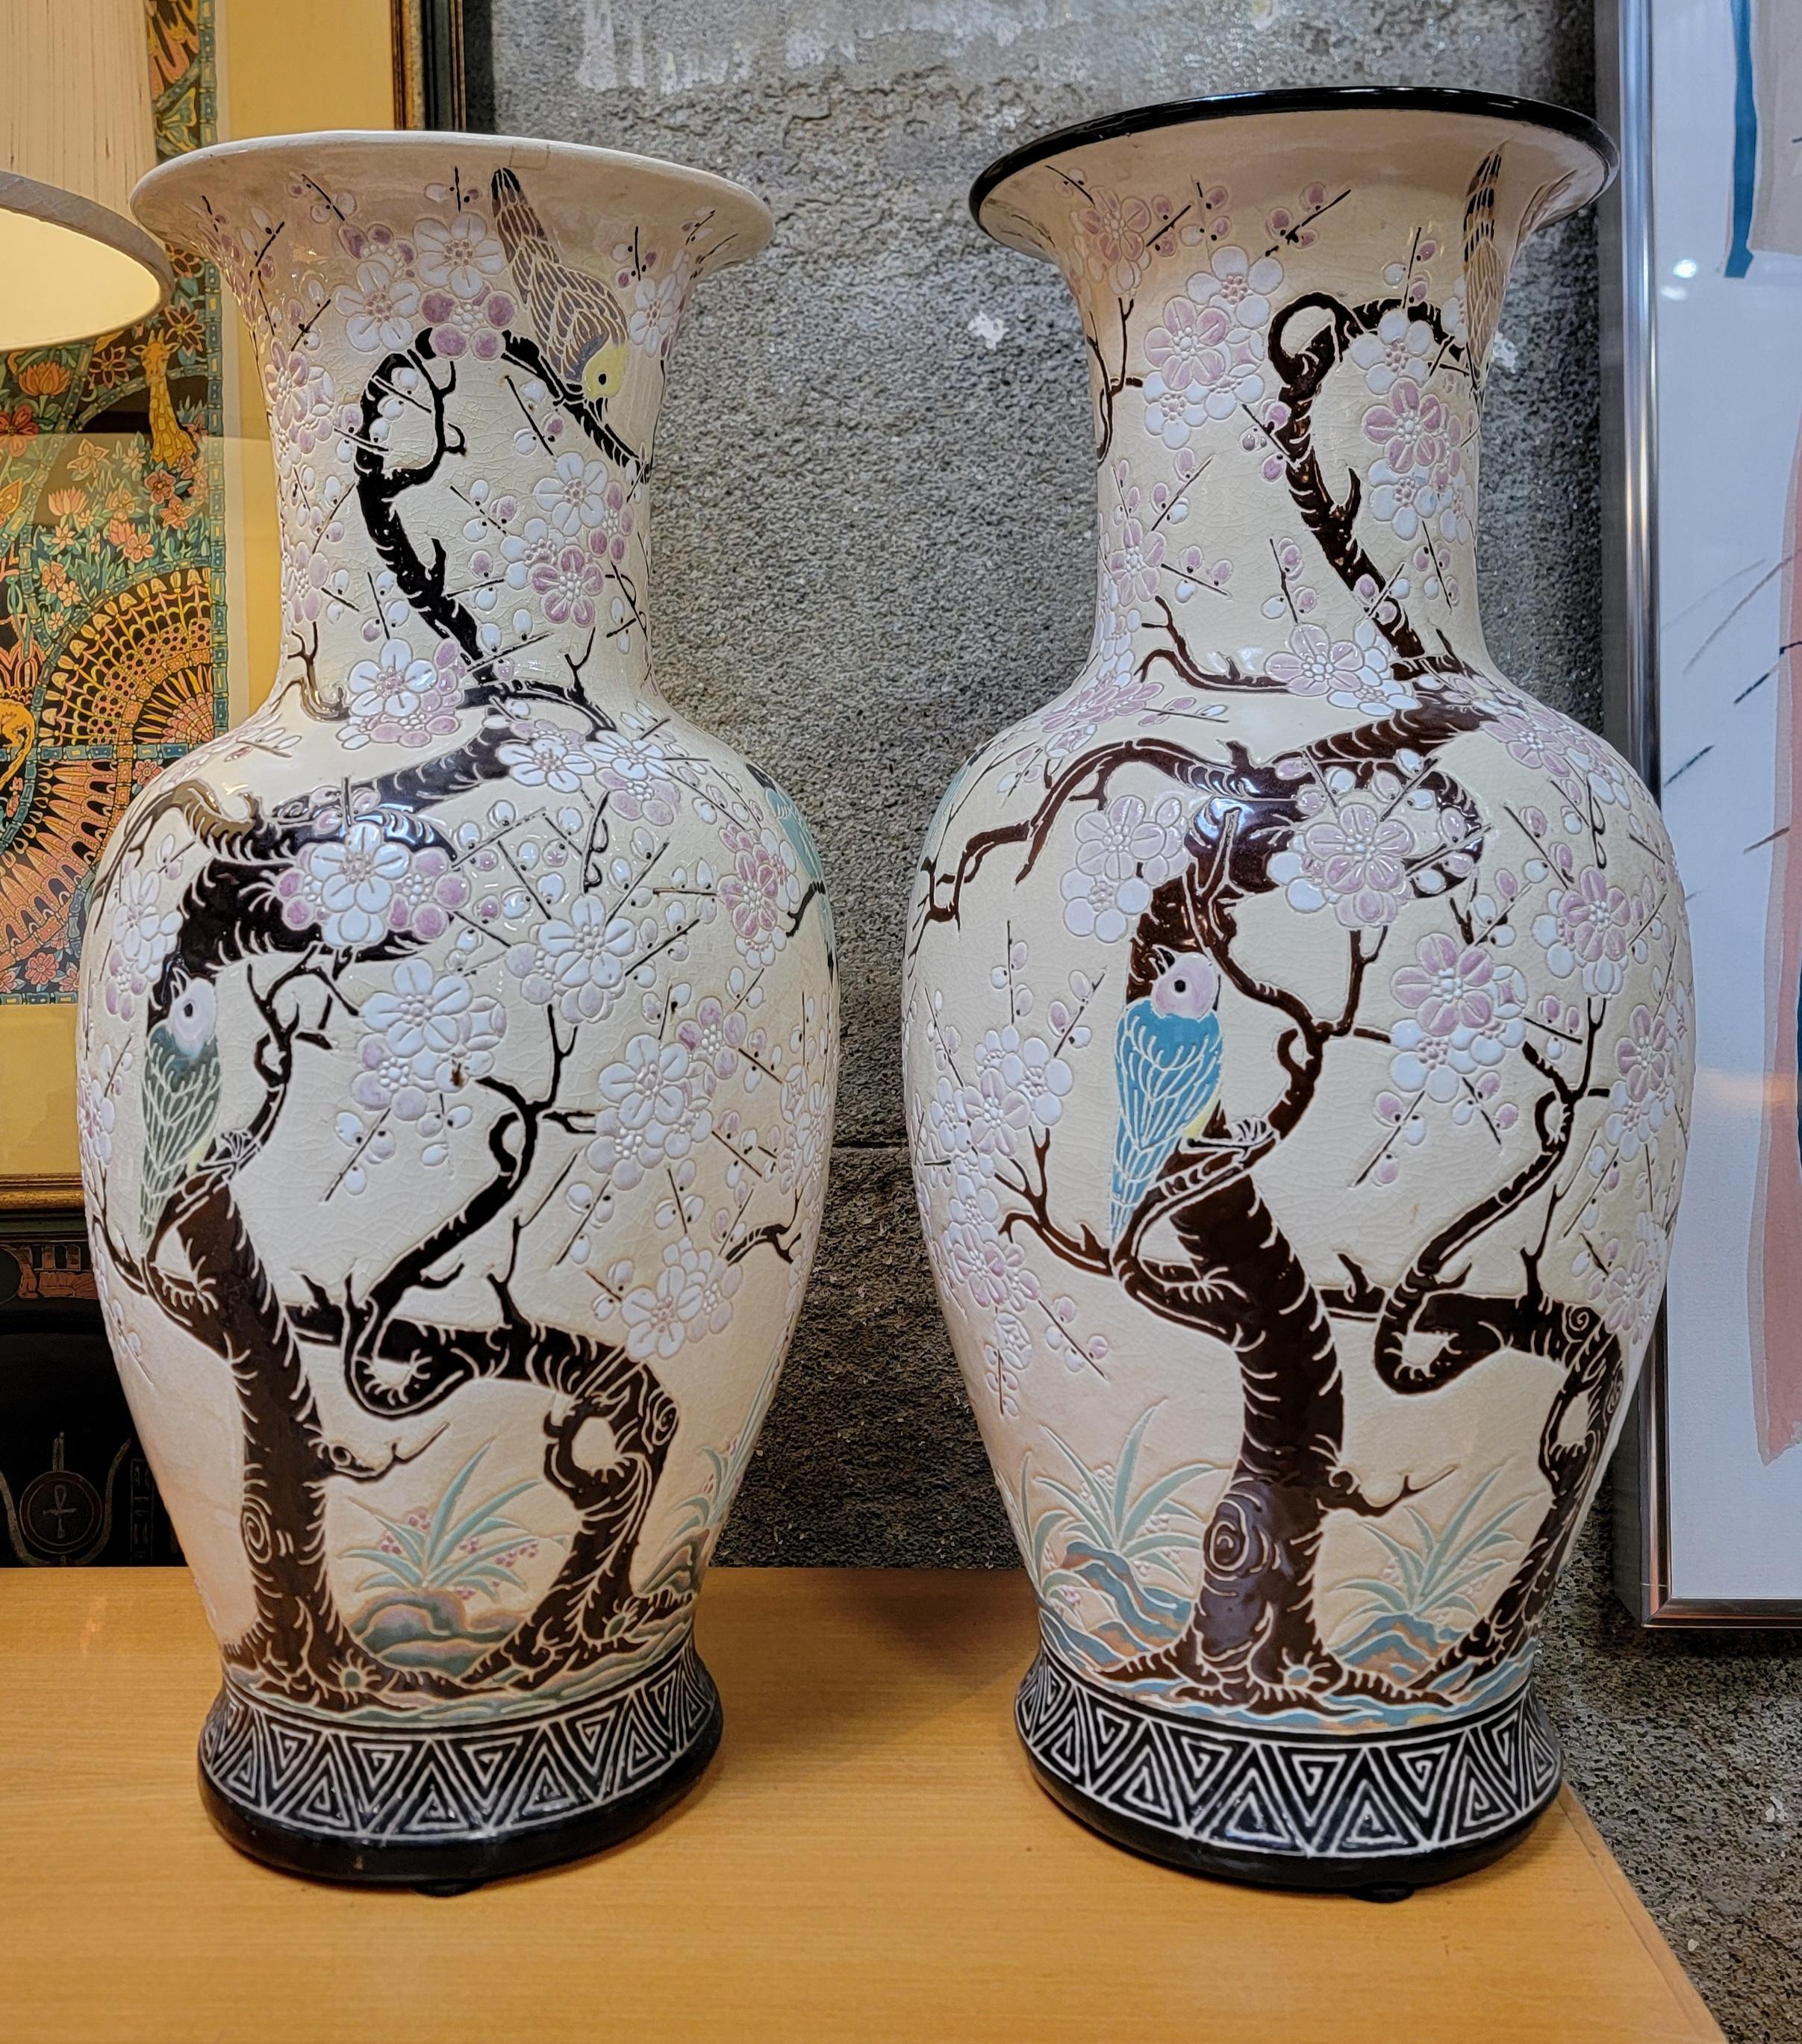 A pair of ceramic floor jars by Dona, Vietman. Circa. 1970. Bird and branch design. (notice one has painted rim, one does not)

Height 24 in.